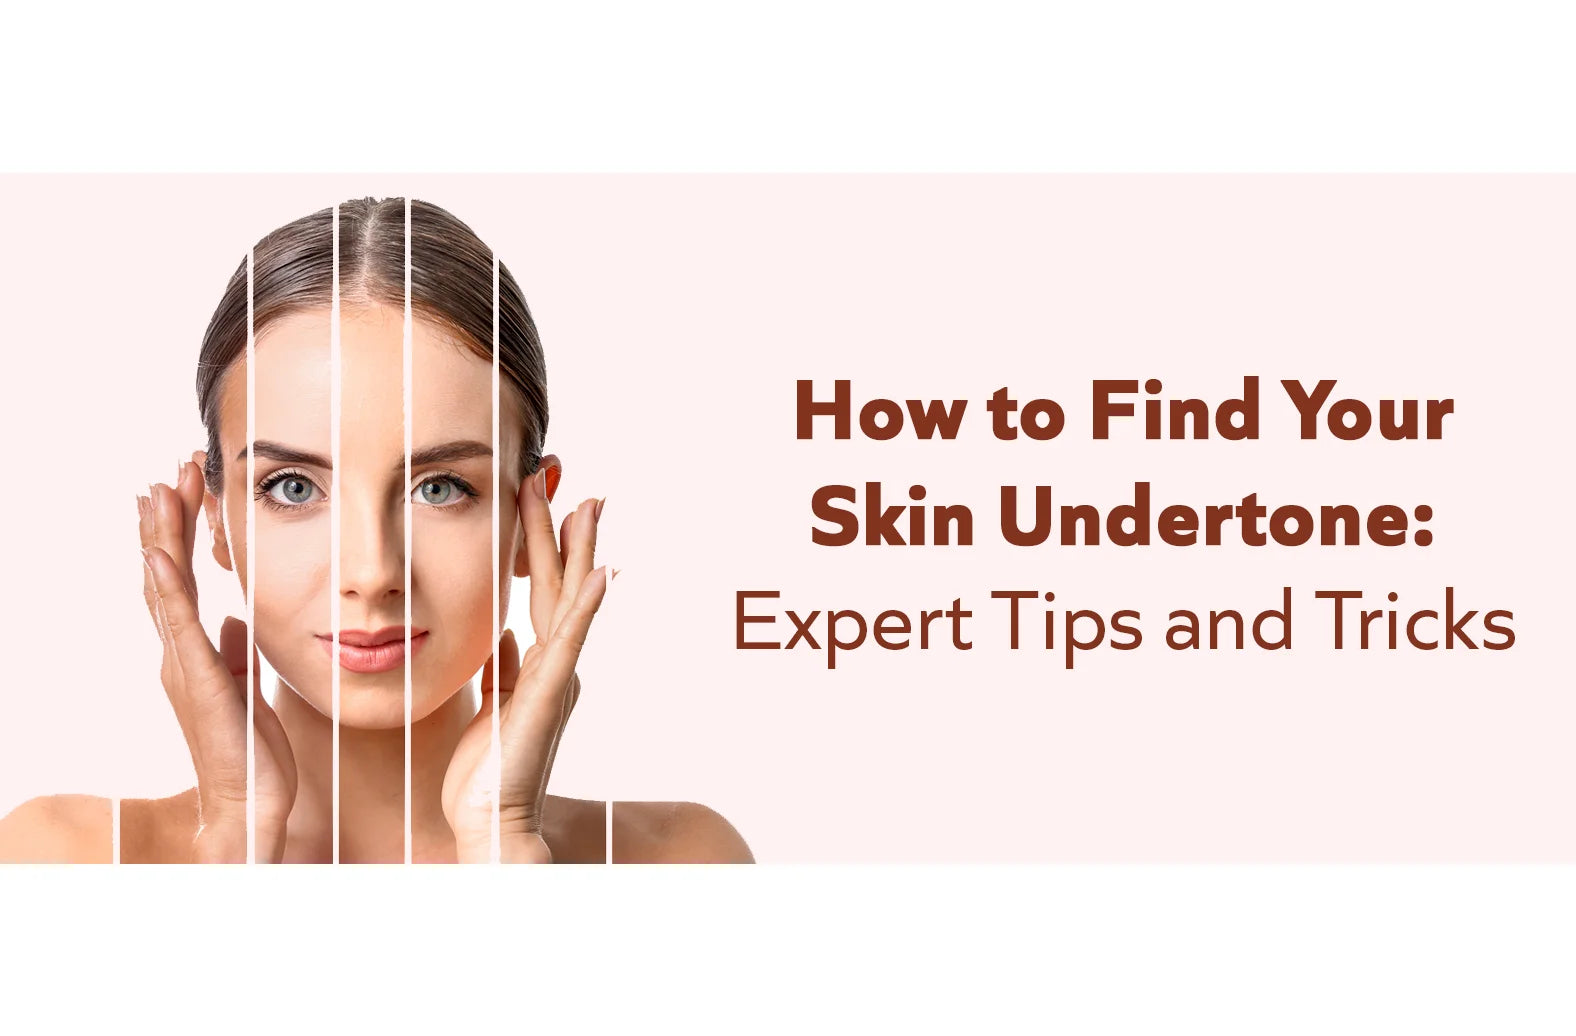 How To Find Your Skin Undertone